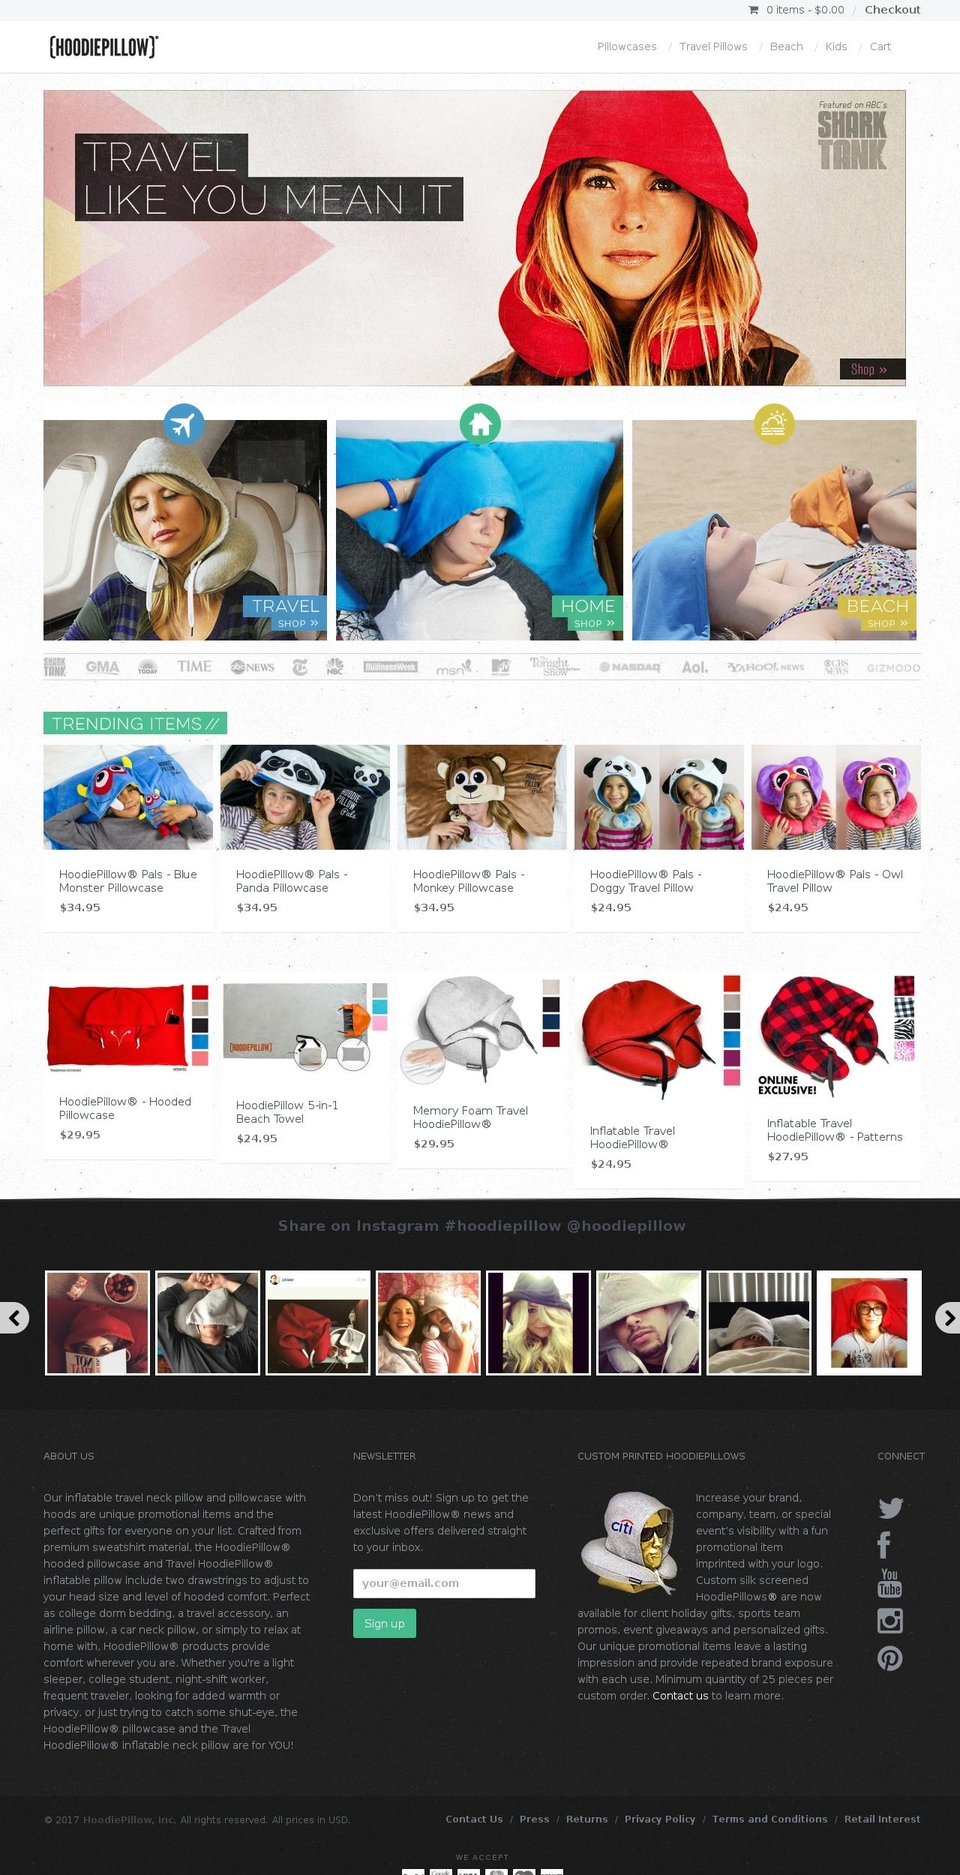 Copy of Providence Shopify theme site example hdpillow.net